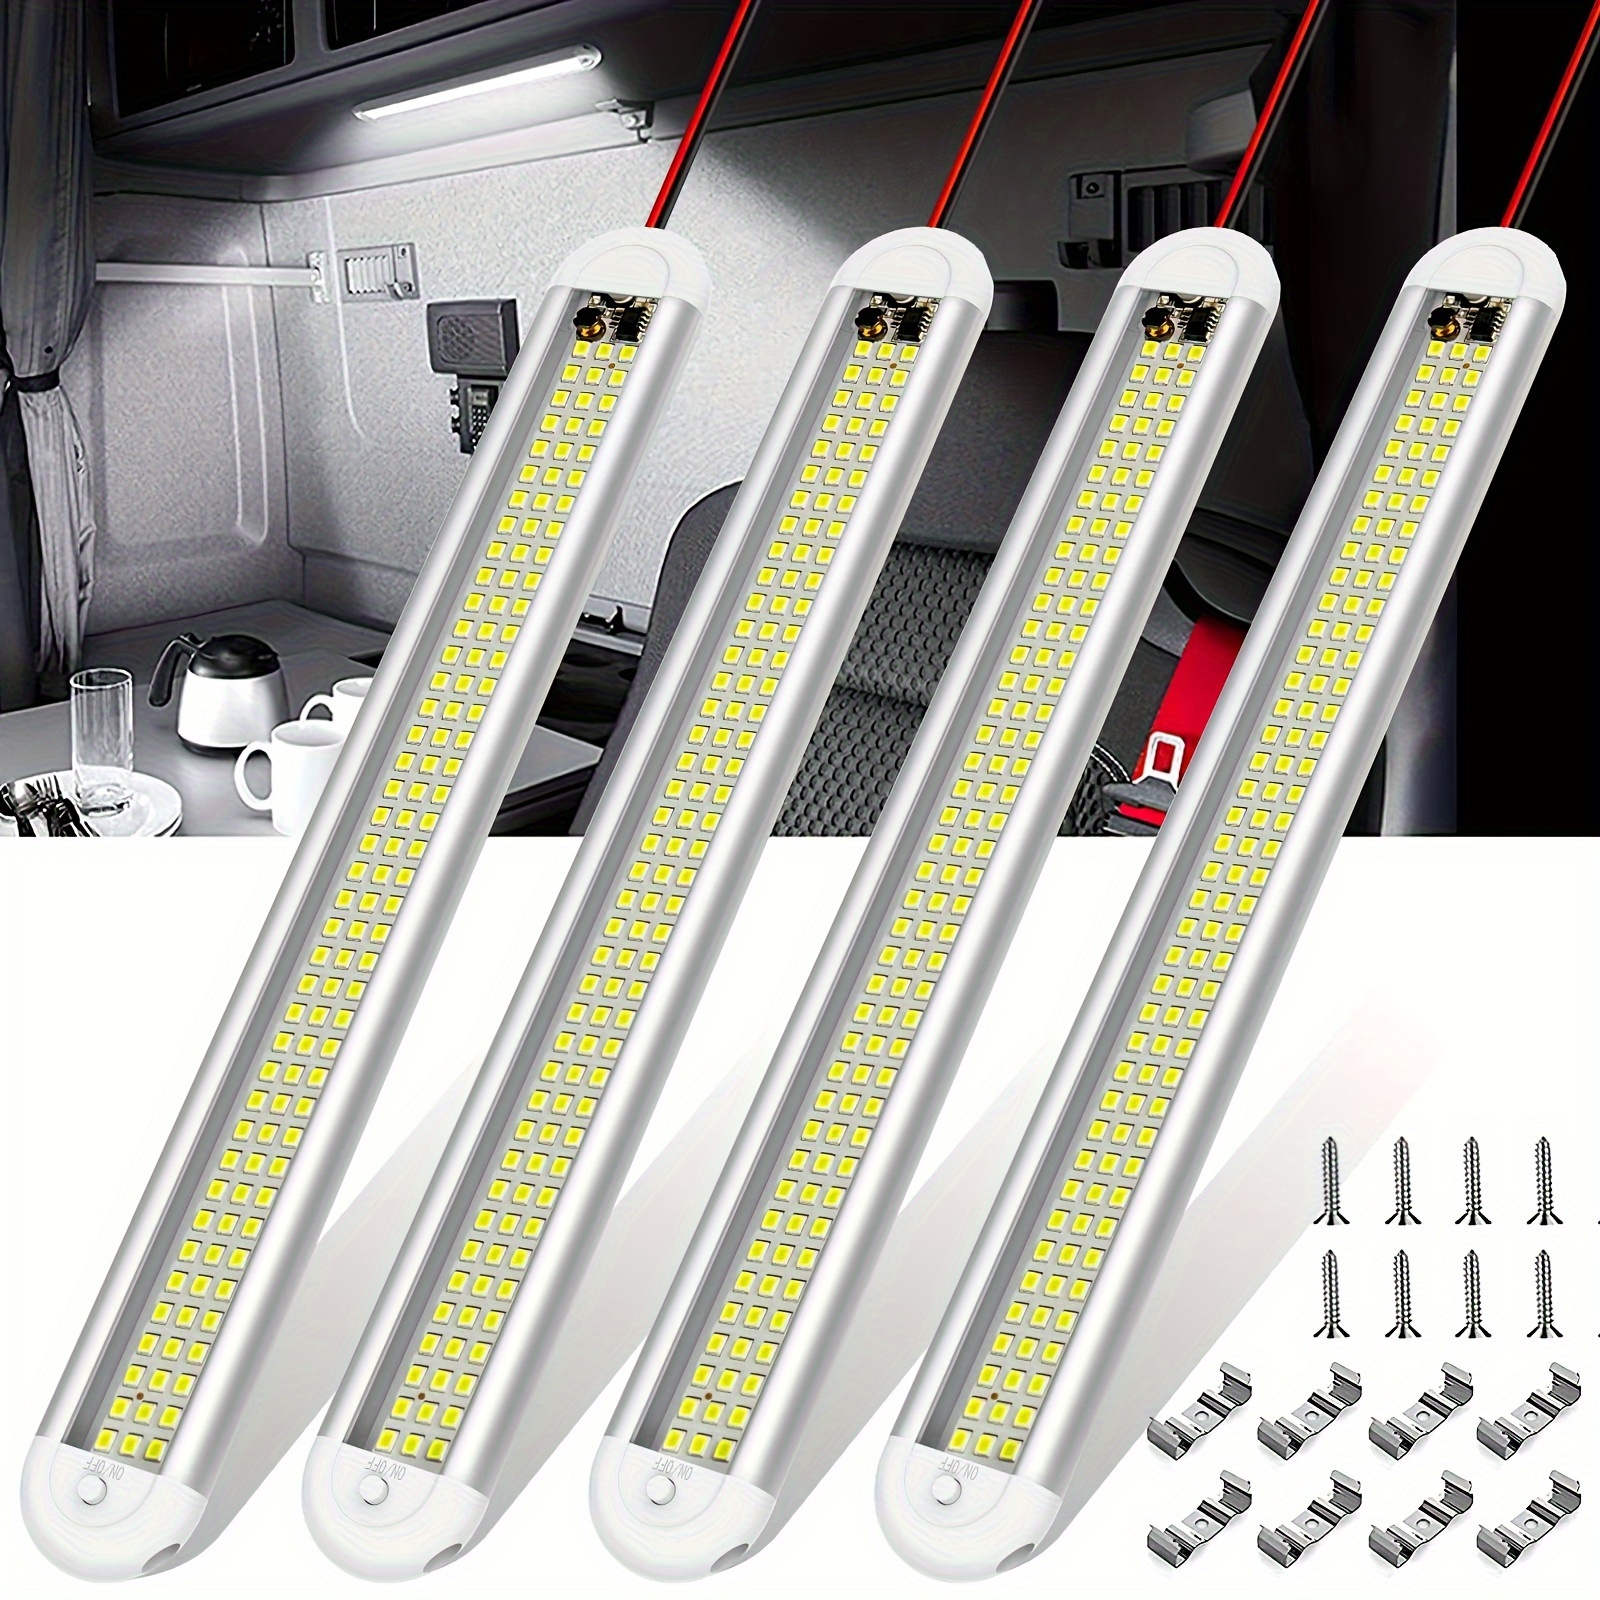 

4-piece 12v Led Interior Light Bars - 120 Leds, 1500lm, 8w Dc With On/off Switch For Rvs, Trucks, , Boats & More